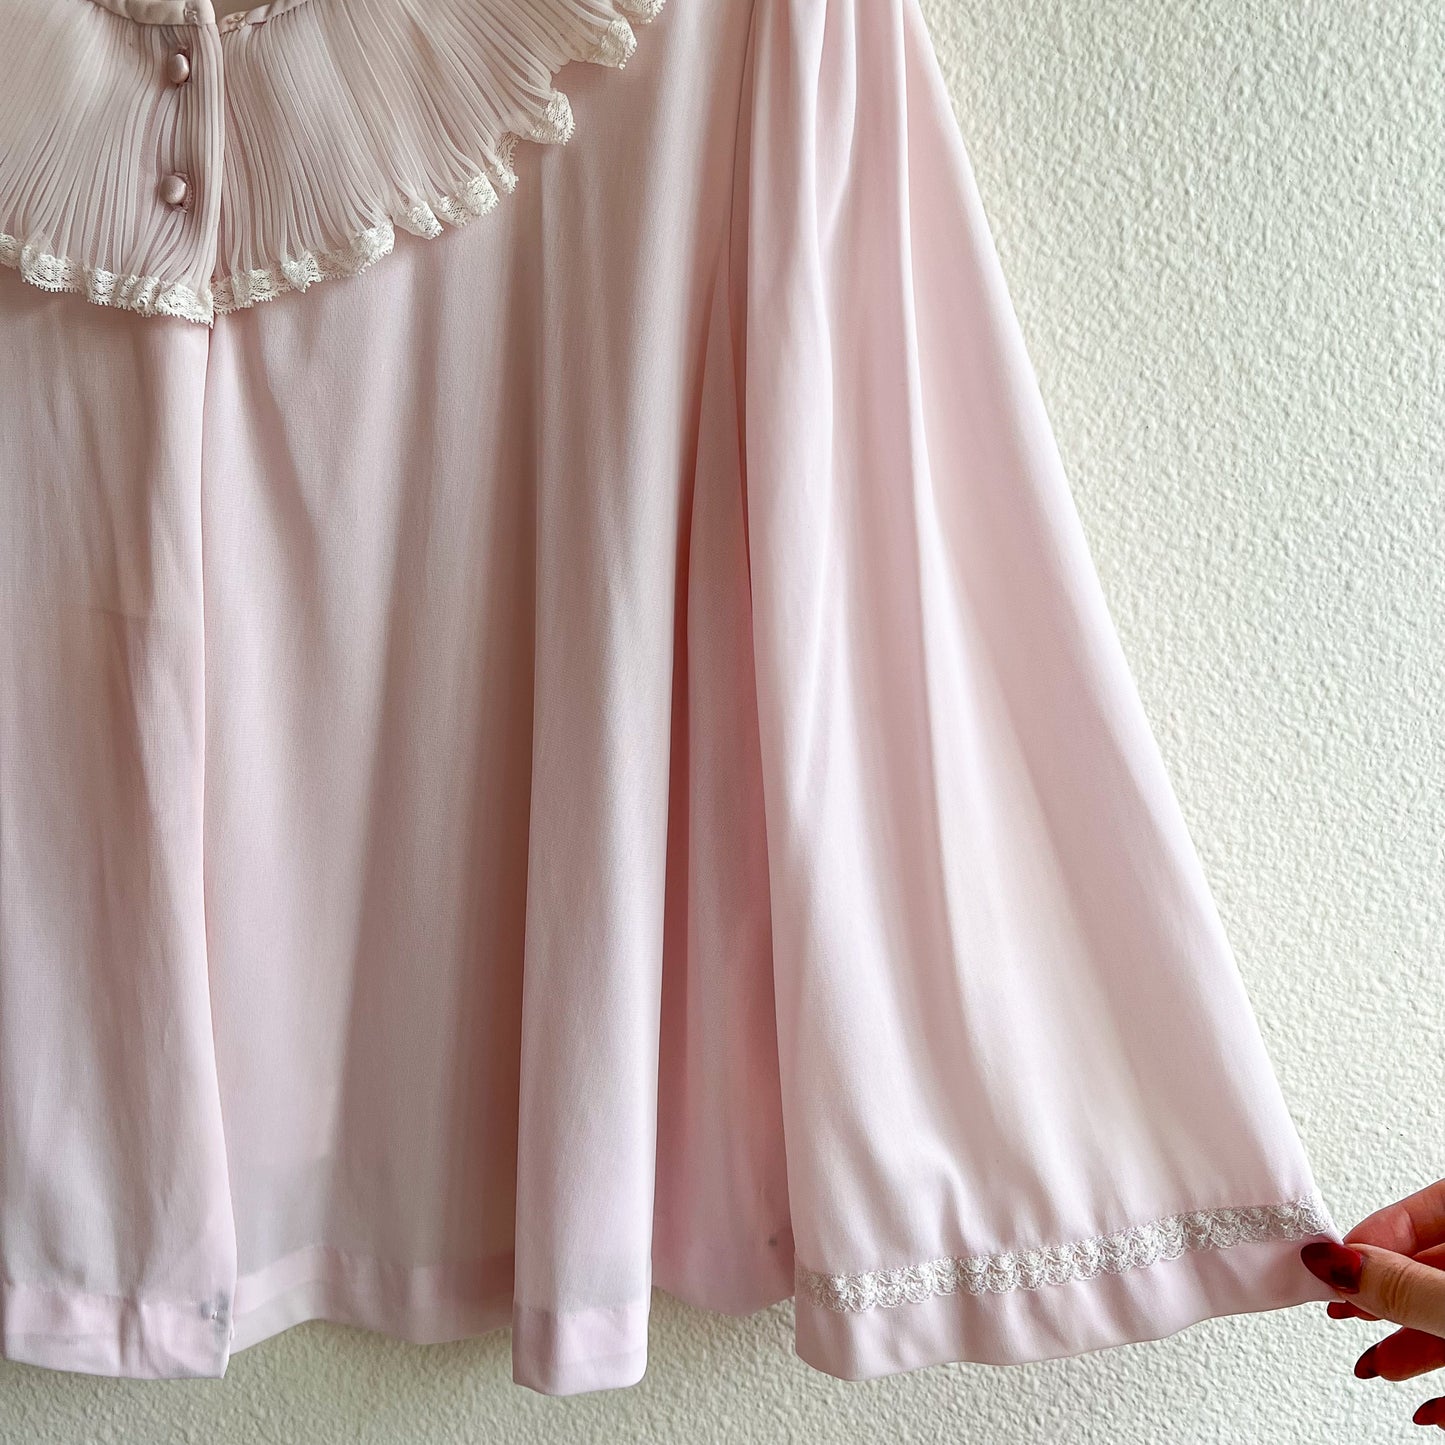 Adorable 1960s Lilac Sheer Bed Jacket (M/L)